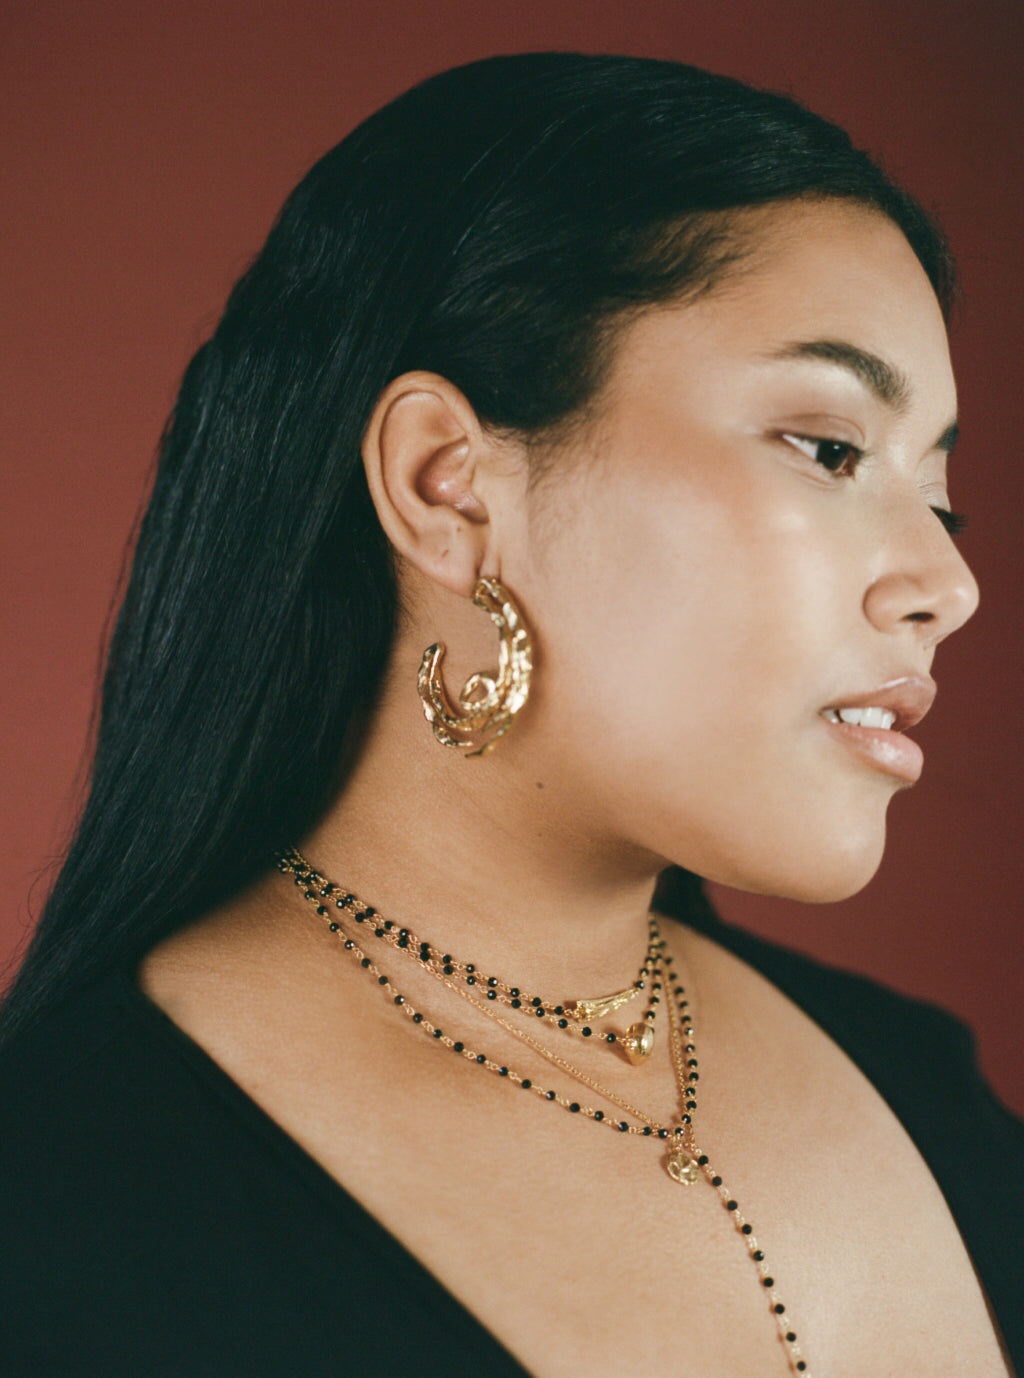 Model wearing large hoop earrings with delicate gold chains